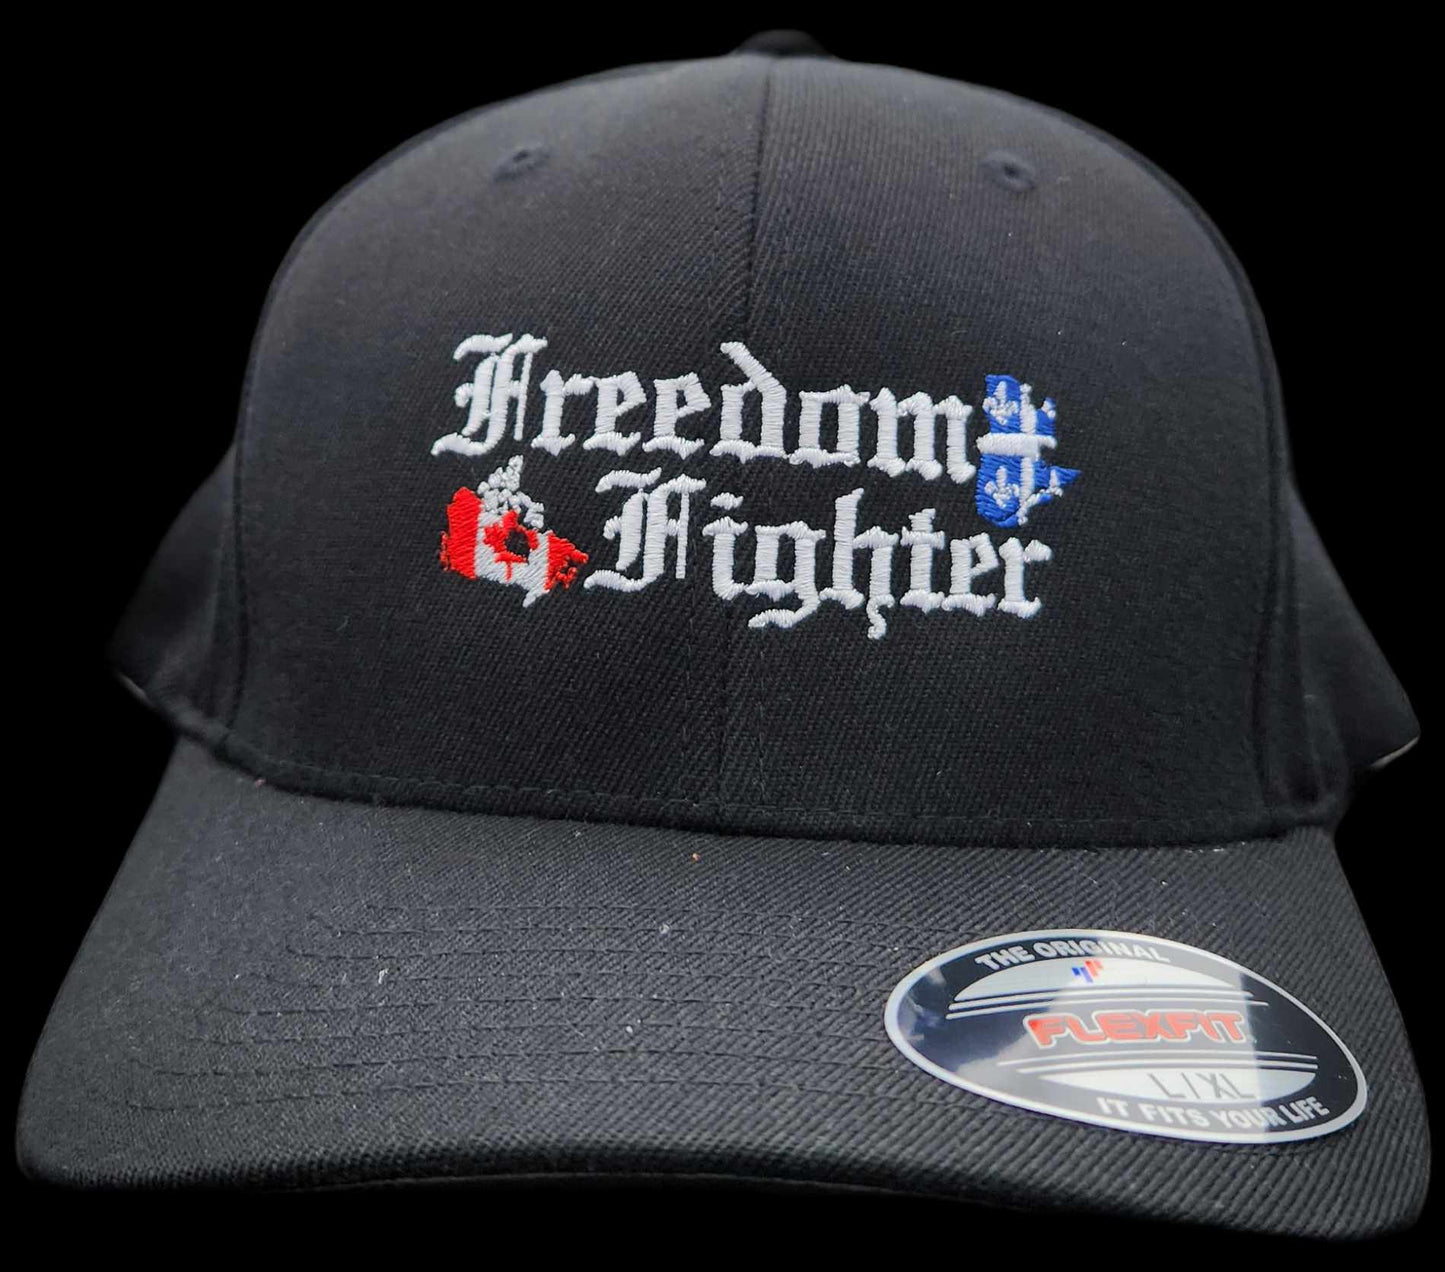 Black Hat with White Freedom Fighter Letter Embroidery